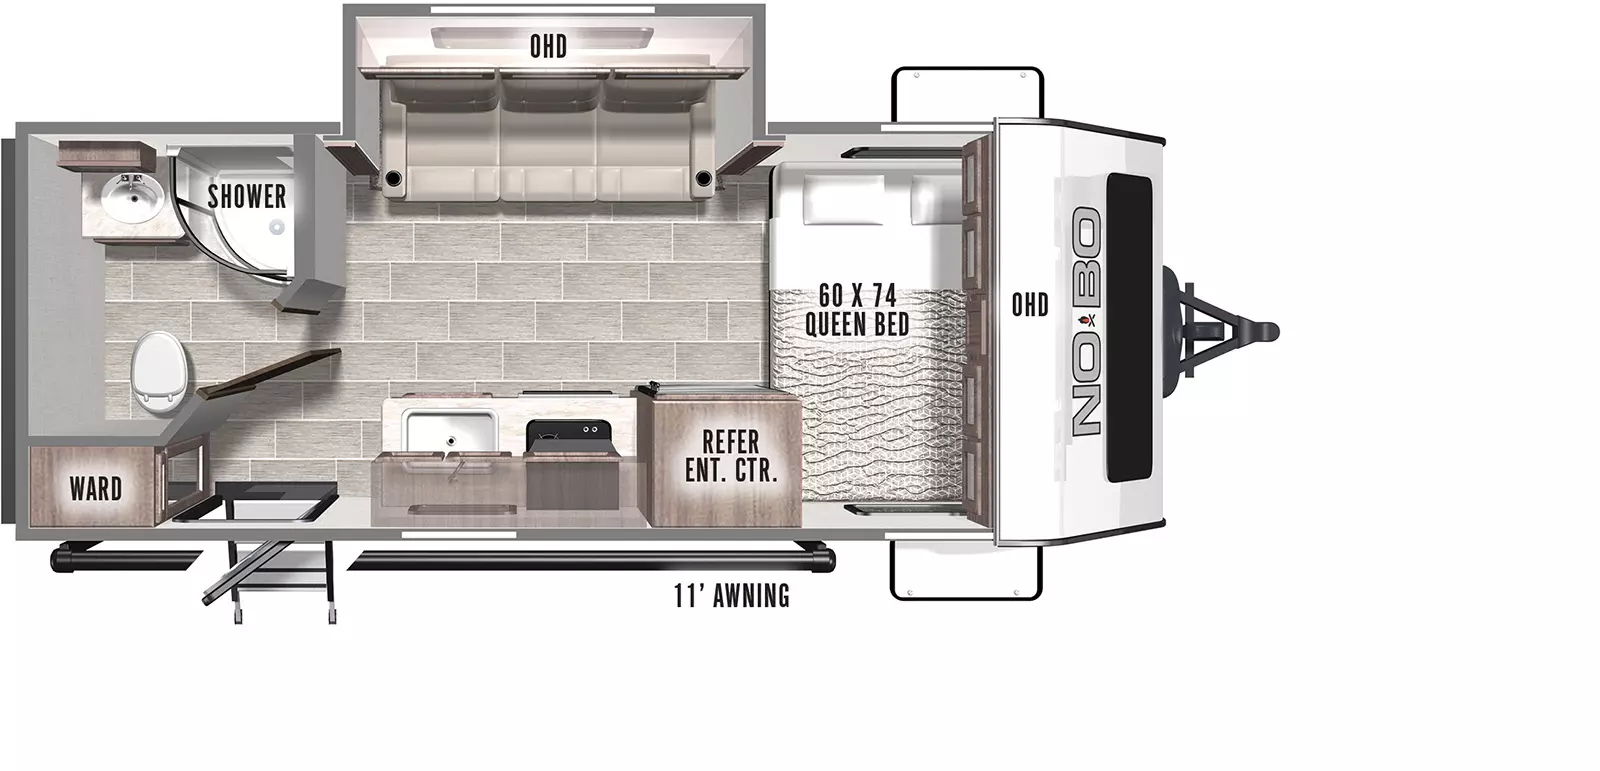 The NB 16.8 has one slide out on the off-doorside and one entry door. There is an 11 foot awning on the door side starting at the rear. The interior is an open concept with: a 60 x 74 side-facing queen bed in the front; a slide out on the off-doorside containing a sofa and overhead cabinet; a kitchen counter on the door side with a single basin sink, cooktop, refrigerator/entertainment center; and a rear bathroom with corner shower, medicine cabinet, single vanity sink and toilet . 